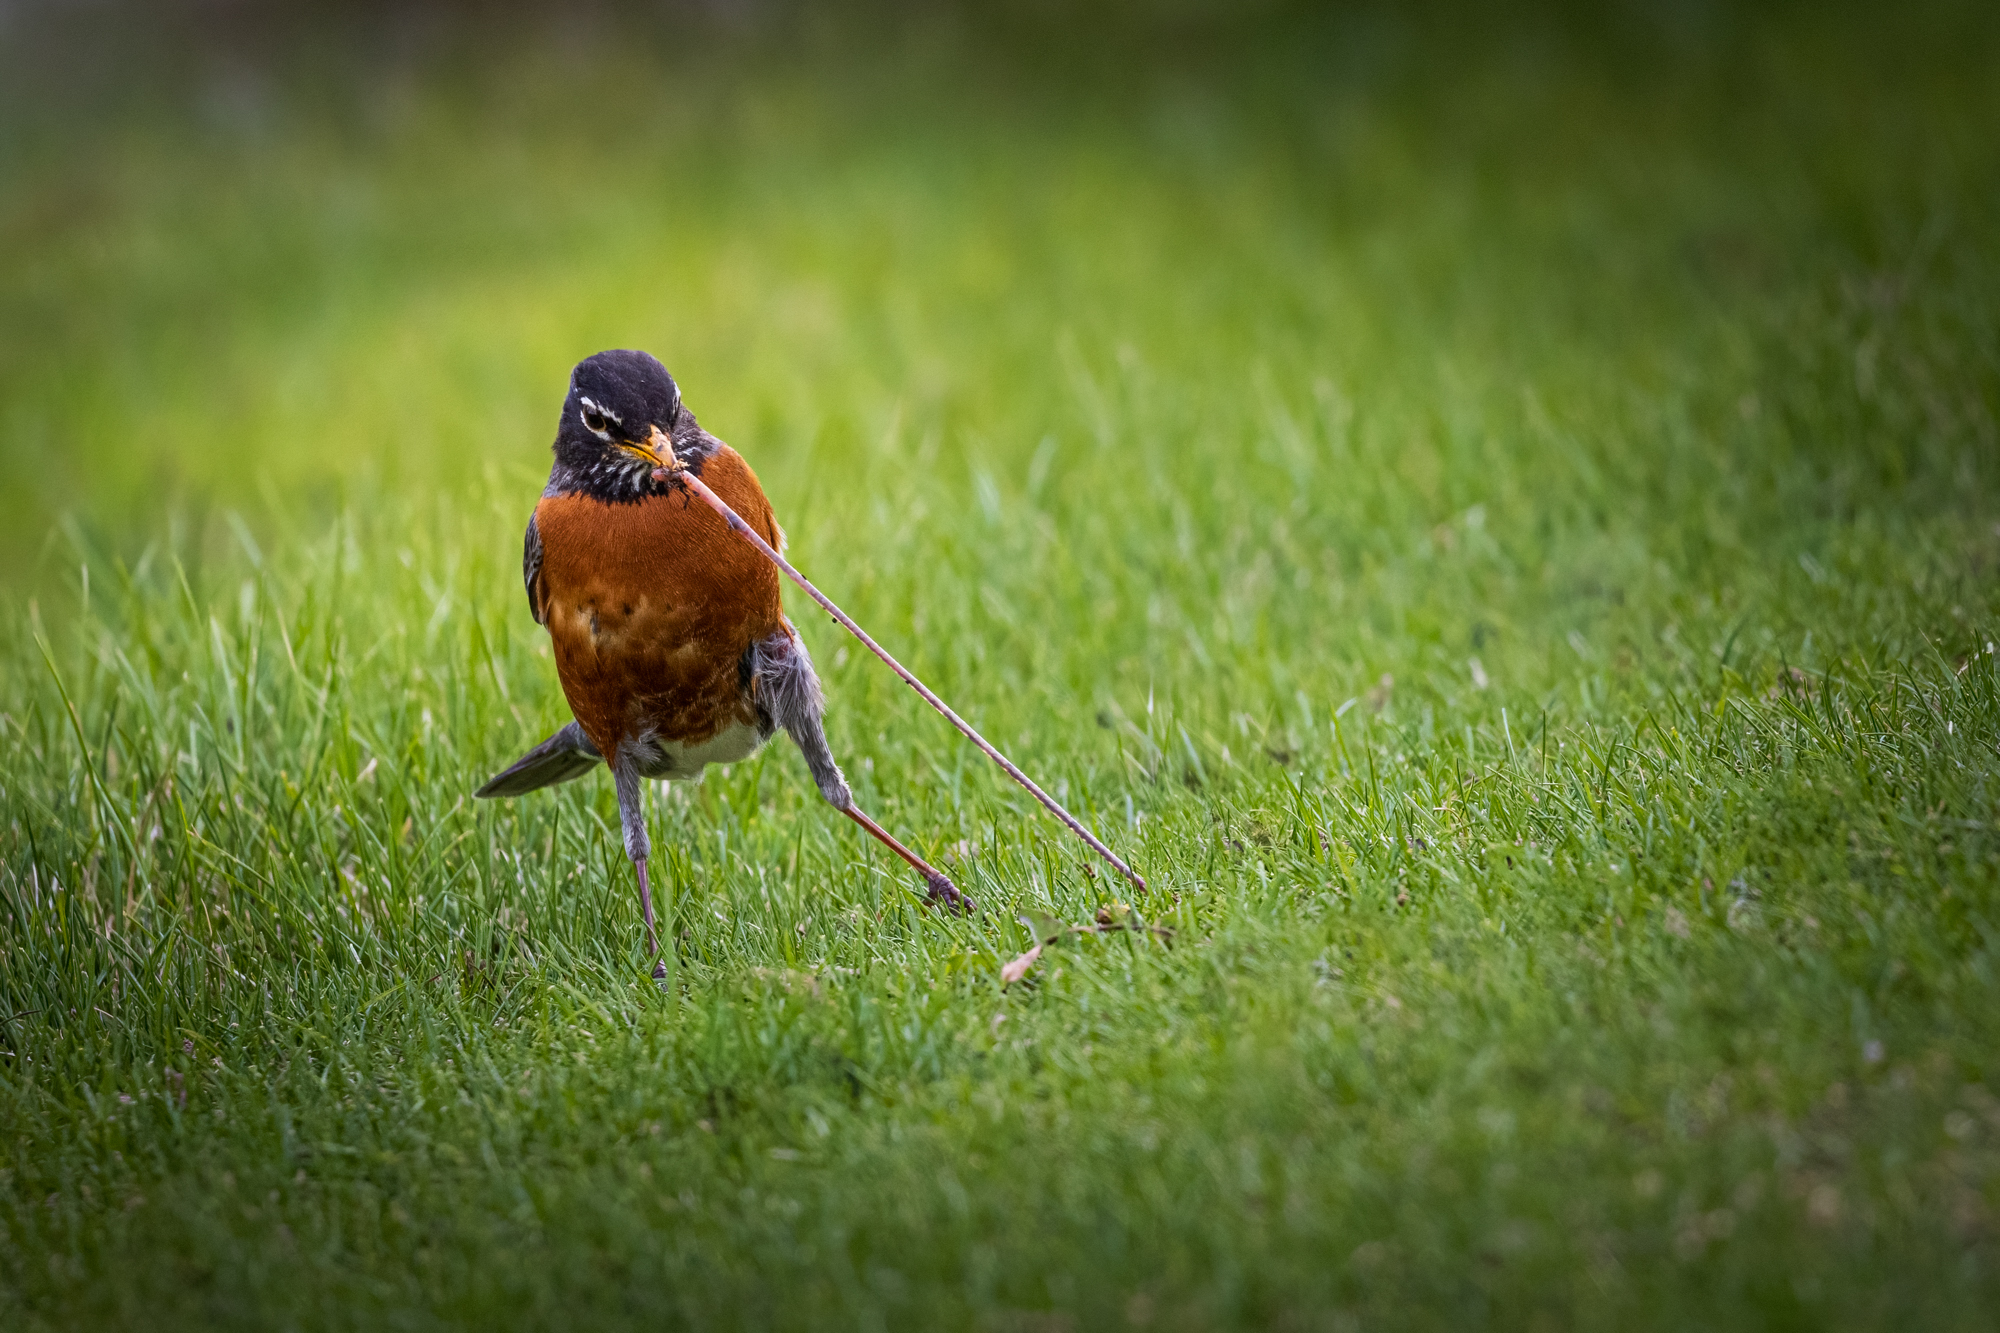 American Robin pulling a worm from the grass